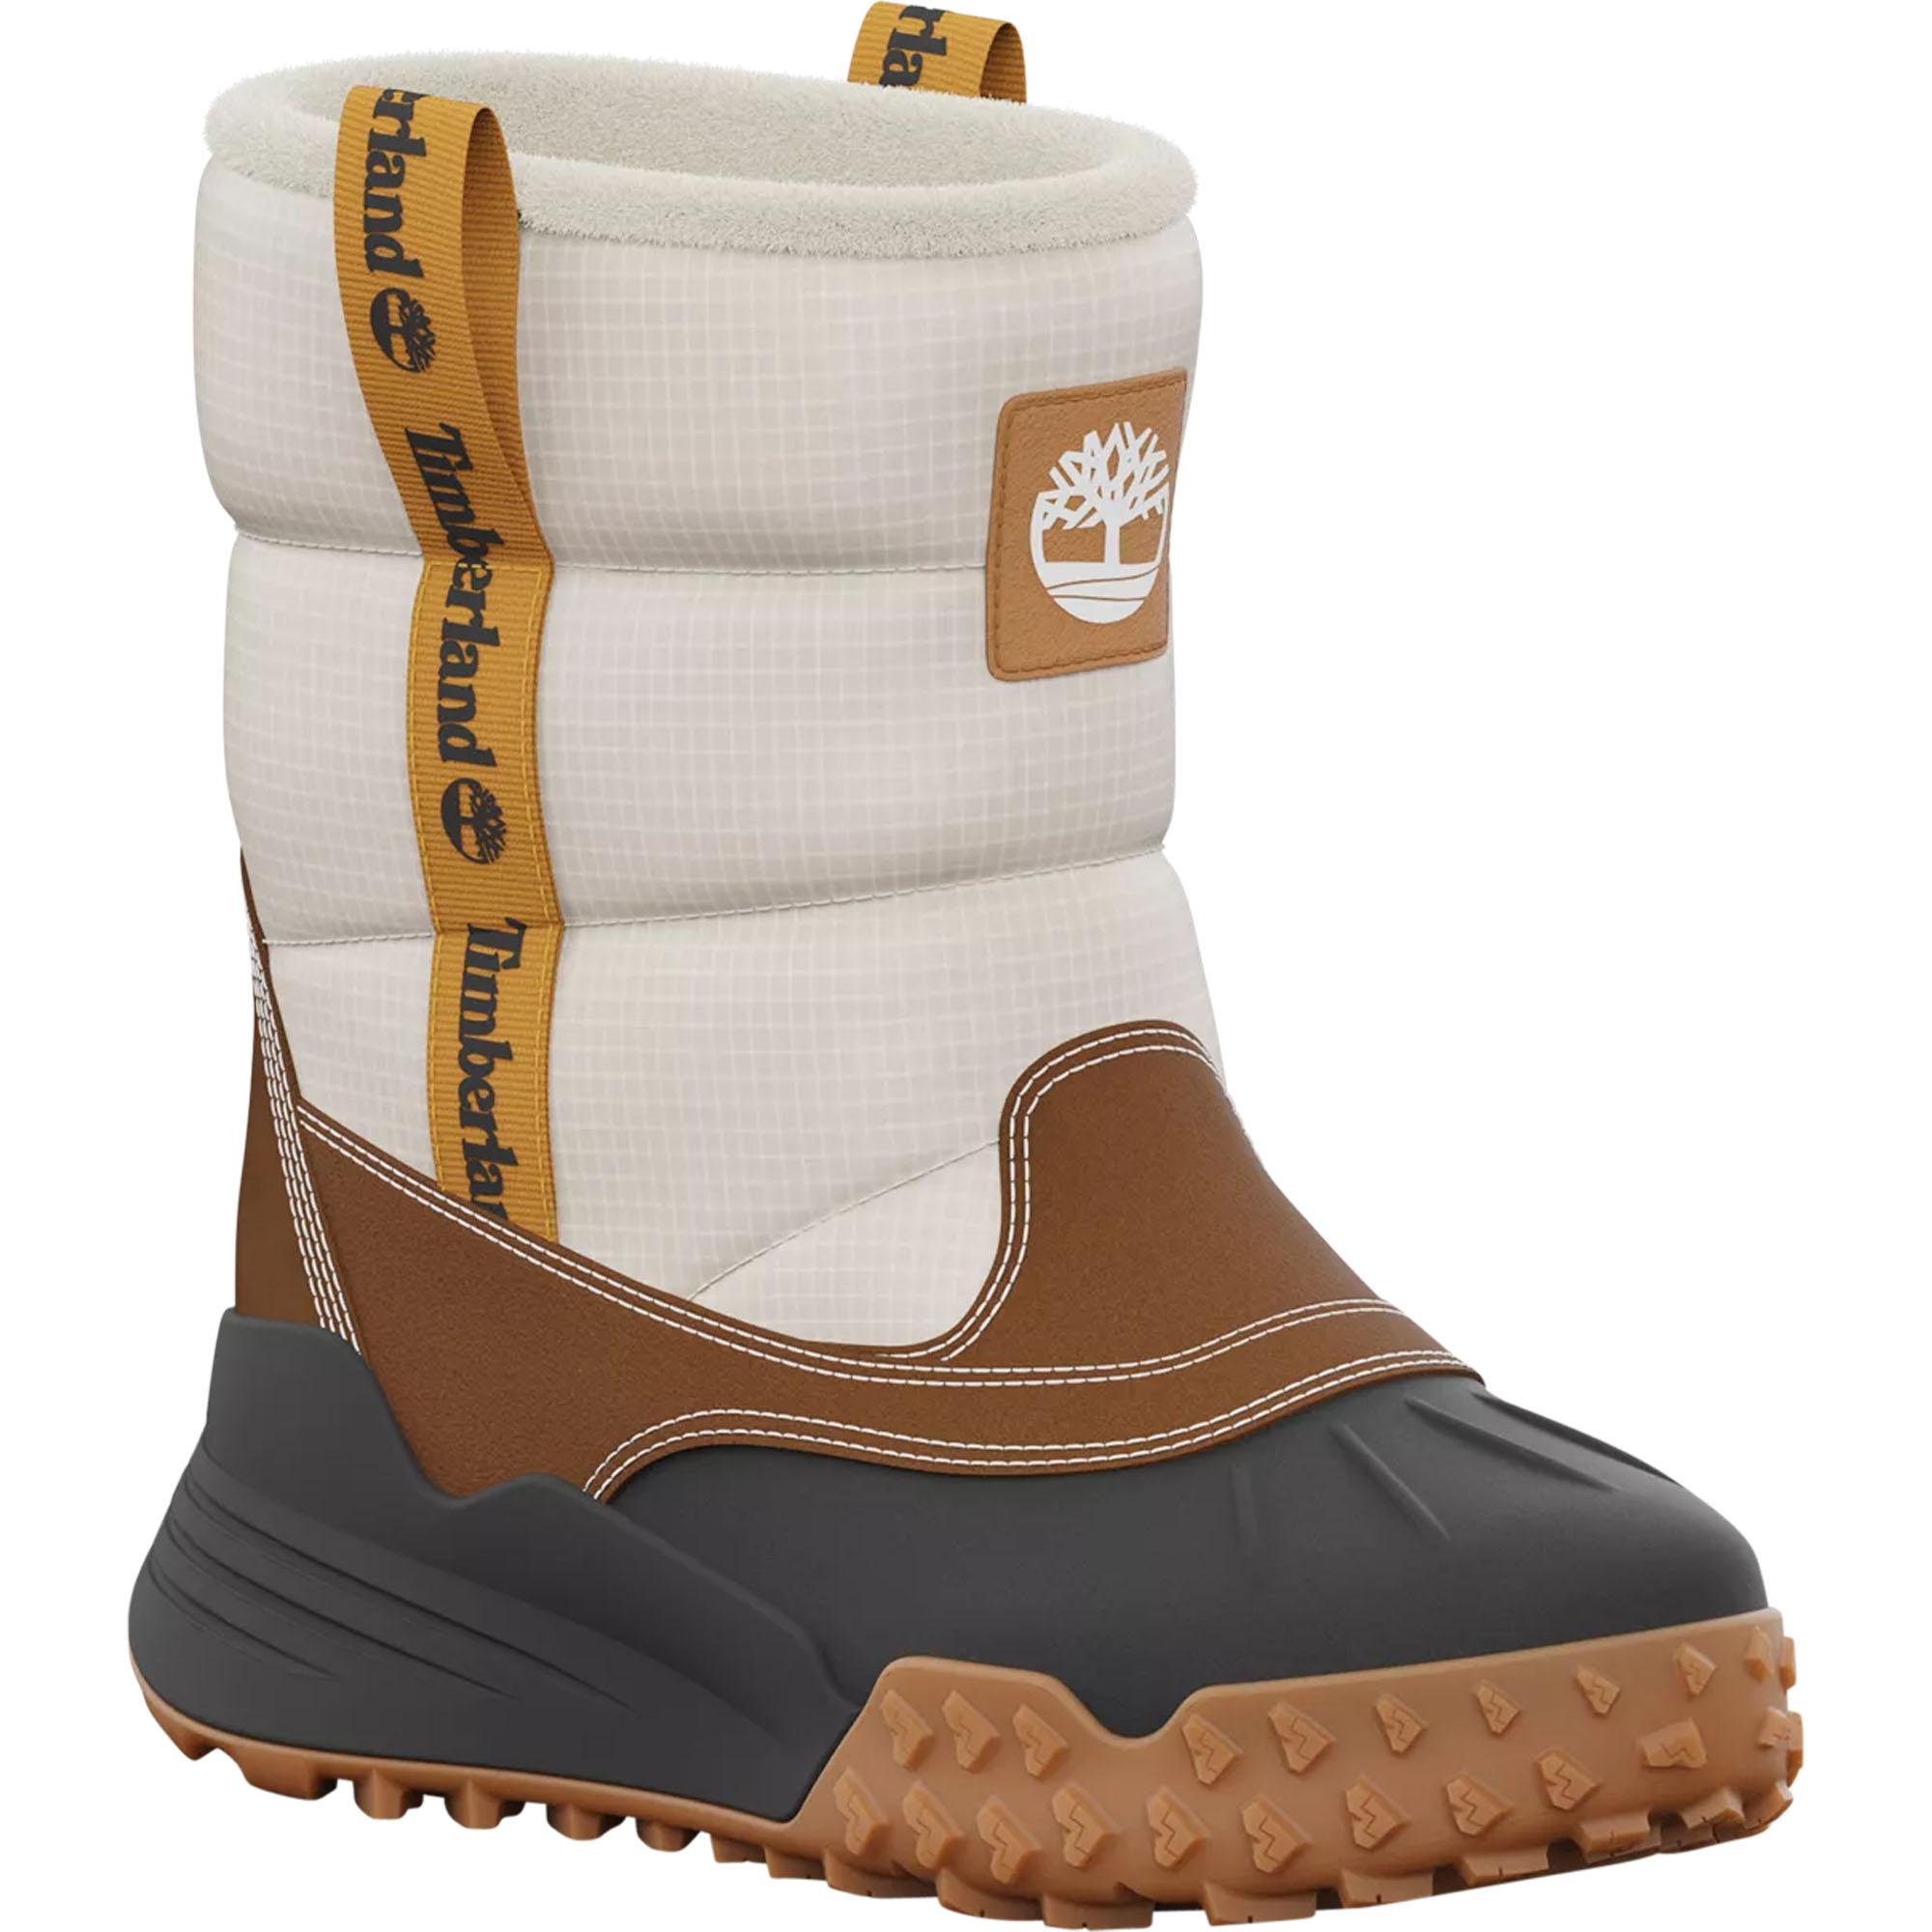 Timberland Moriah Range Insulated Pull-On Women's Snow Boots